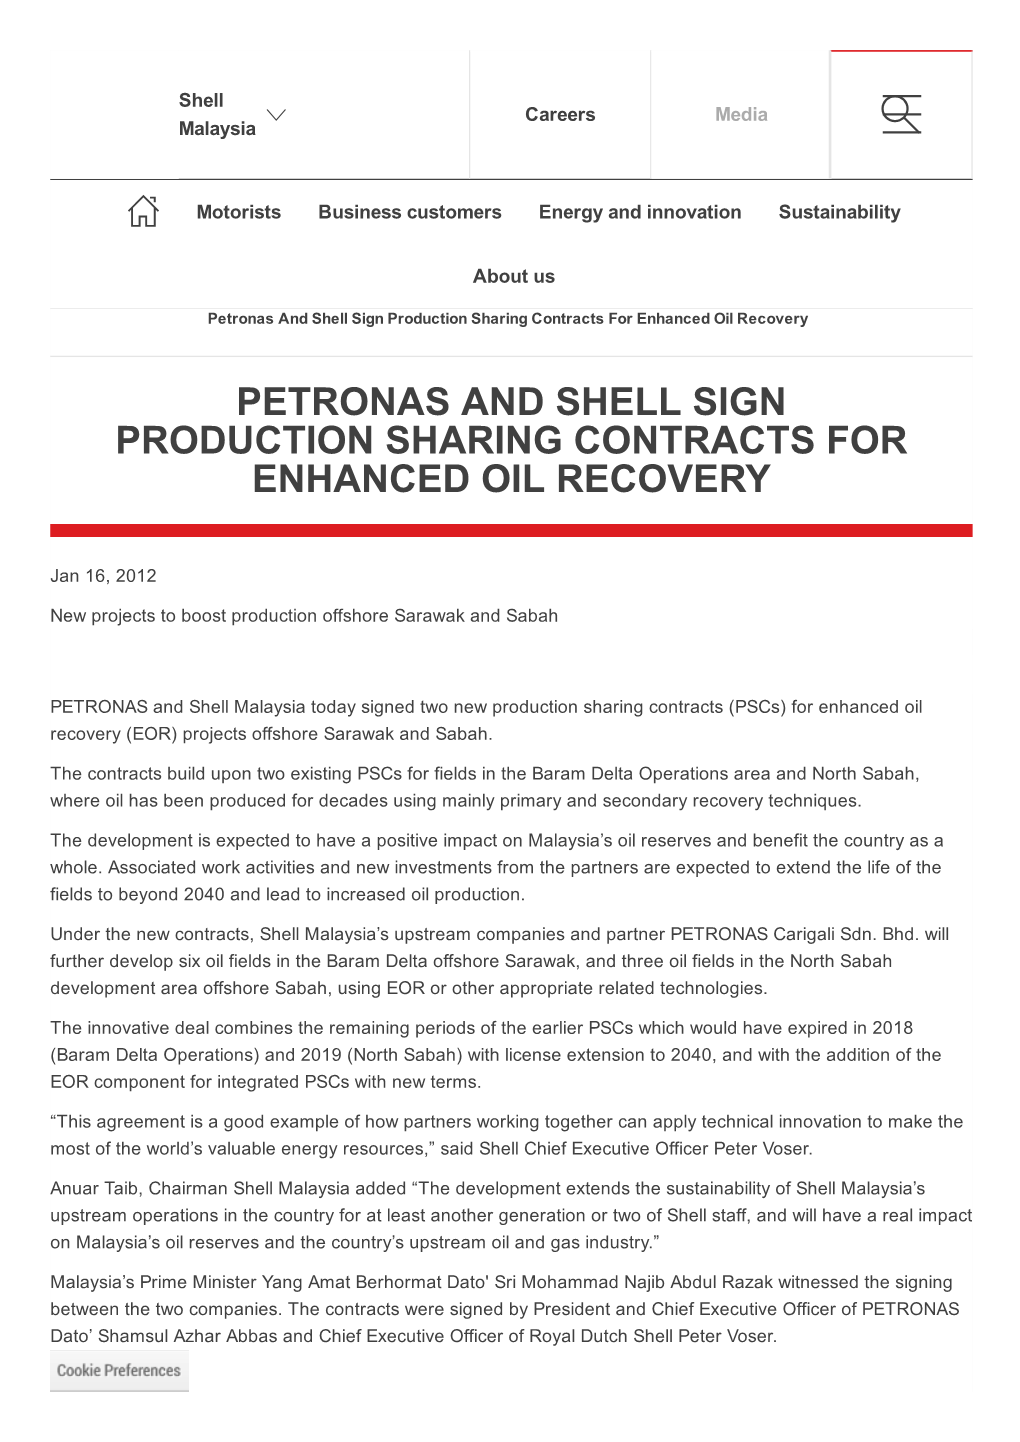 Petronas and Shell Sign Production Sharing Contracts for Enhanced Oil Recovery